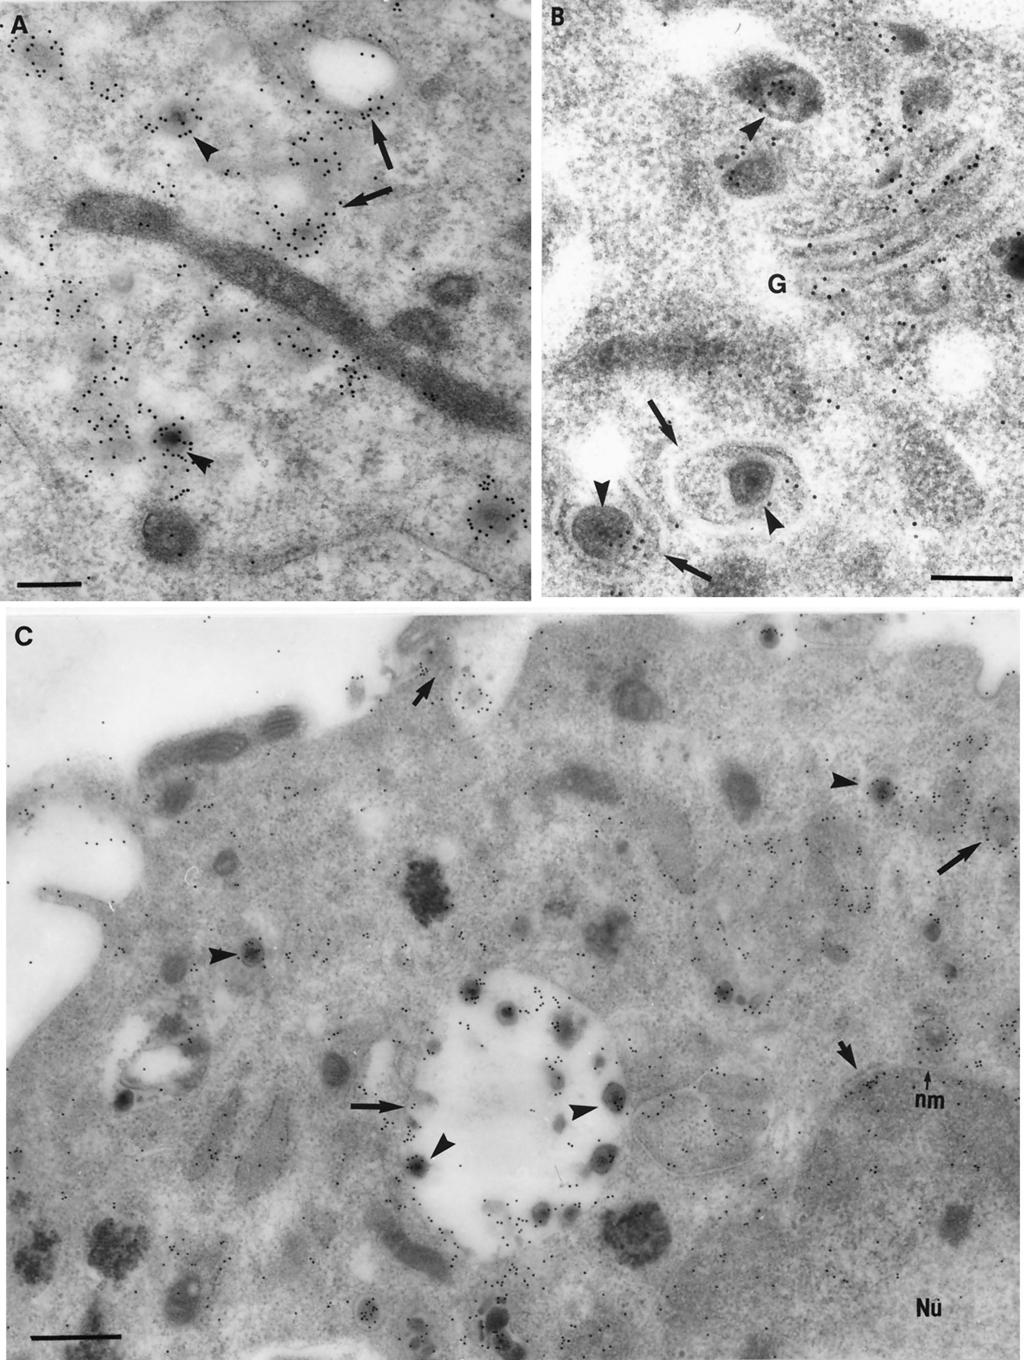 FIG. 4. Immunolabeling of tegument proteins and glycoproteins on viral particles and cytoplasmic membranes in HSV-1-infected neurons.